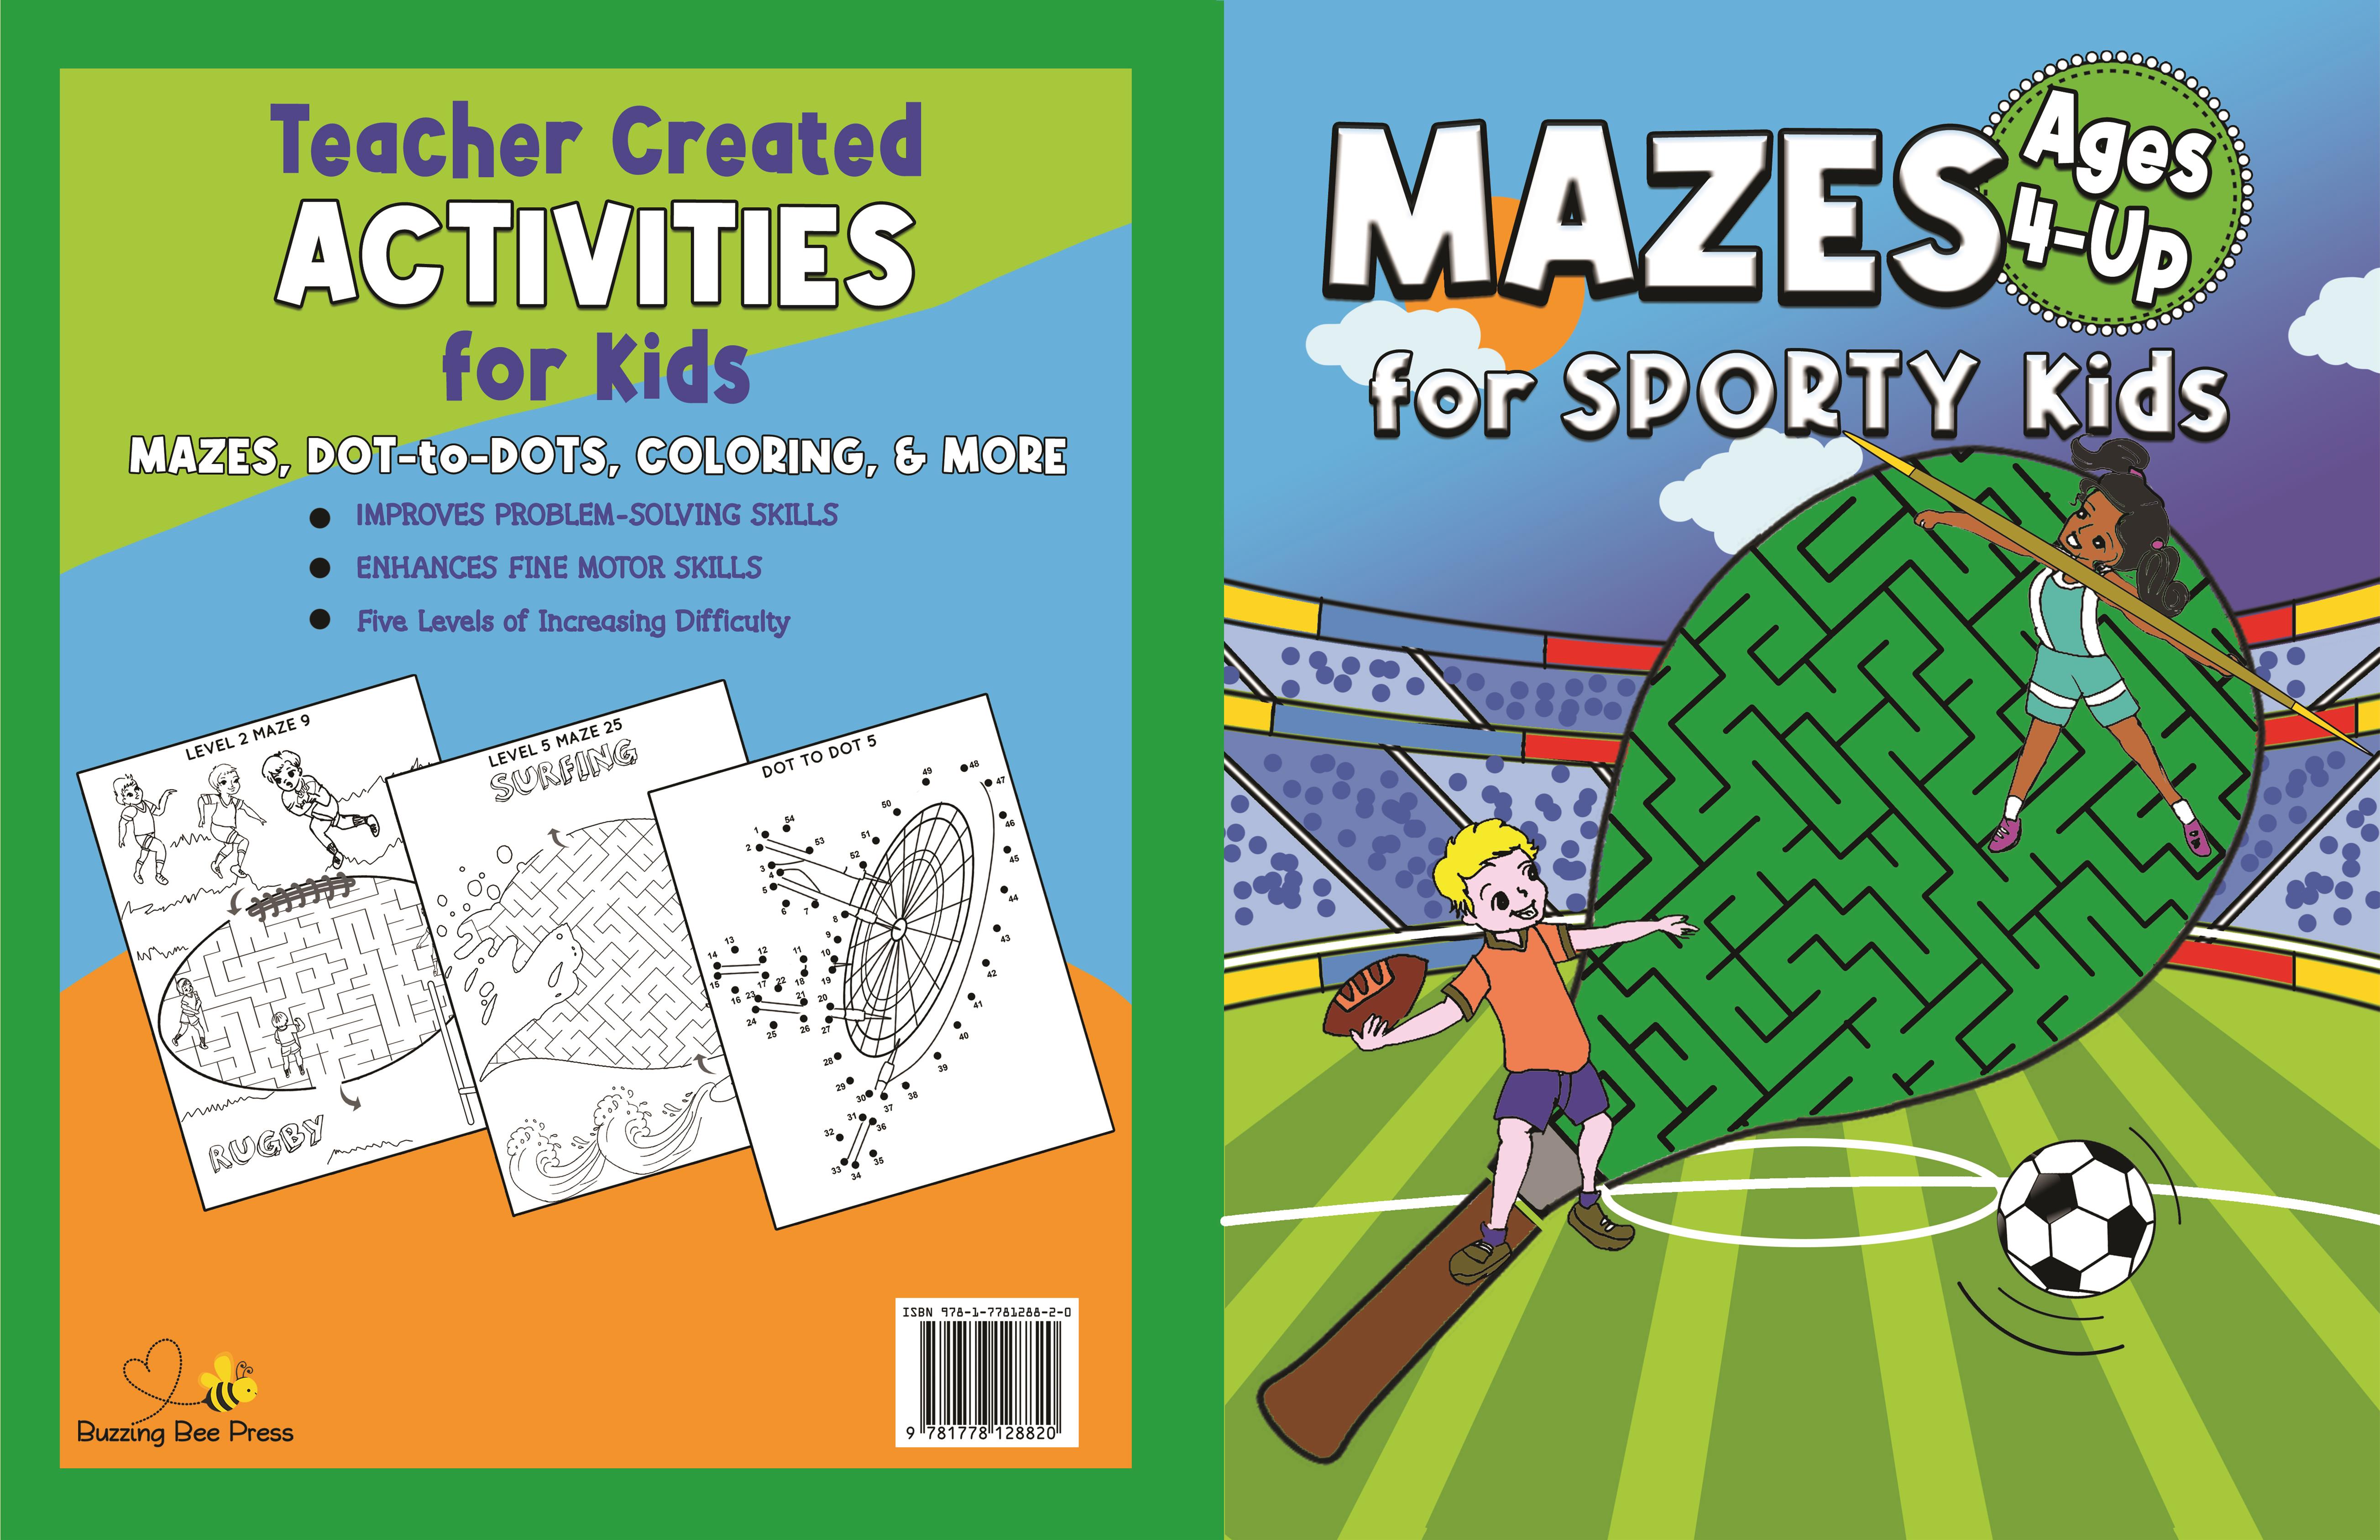 Mazes for Sporty Kids cover image